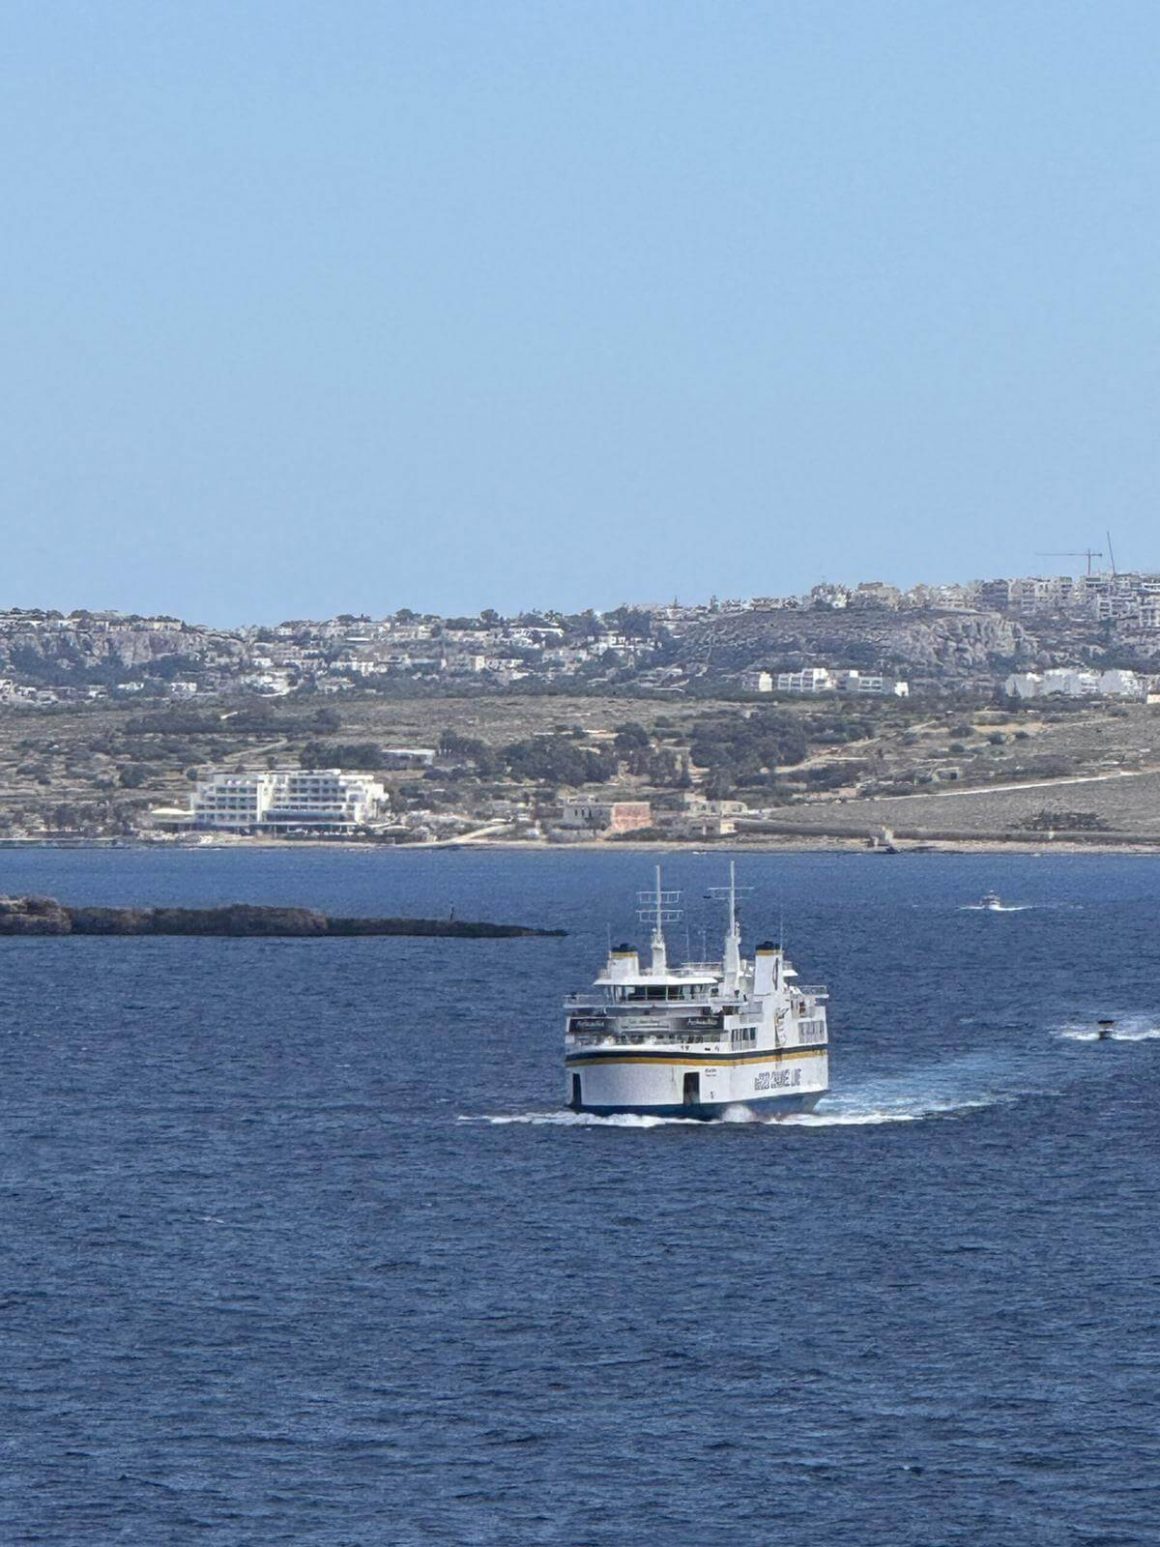 Views of the ferry in Gozo
